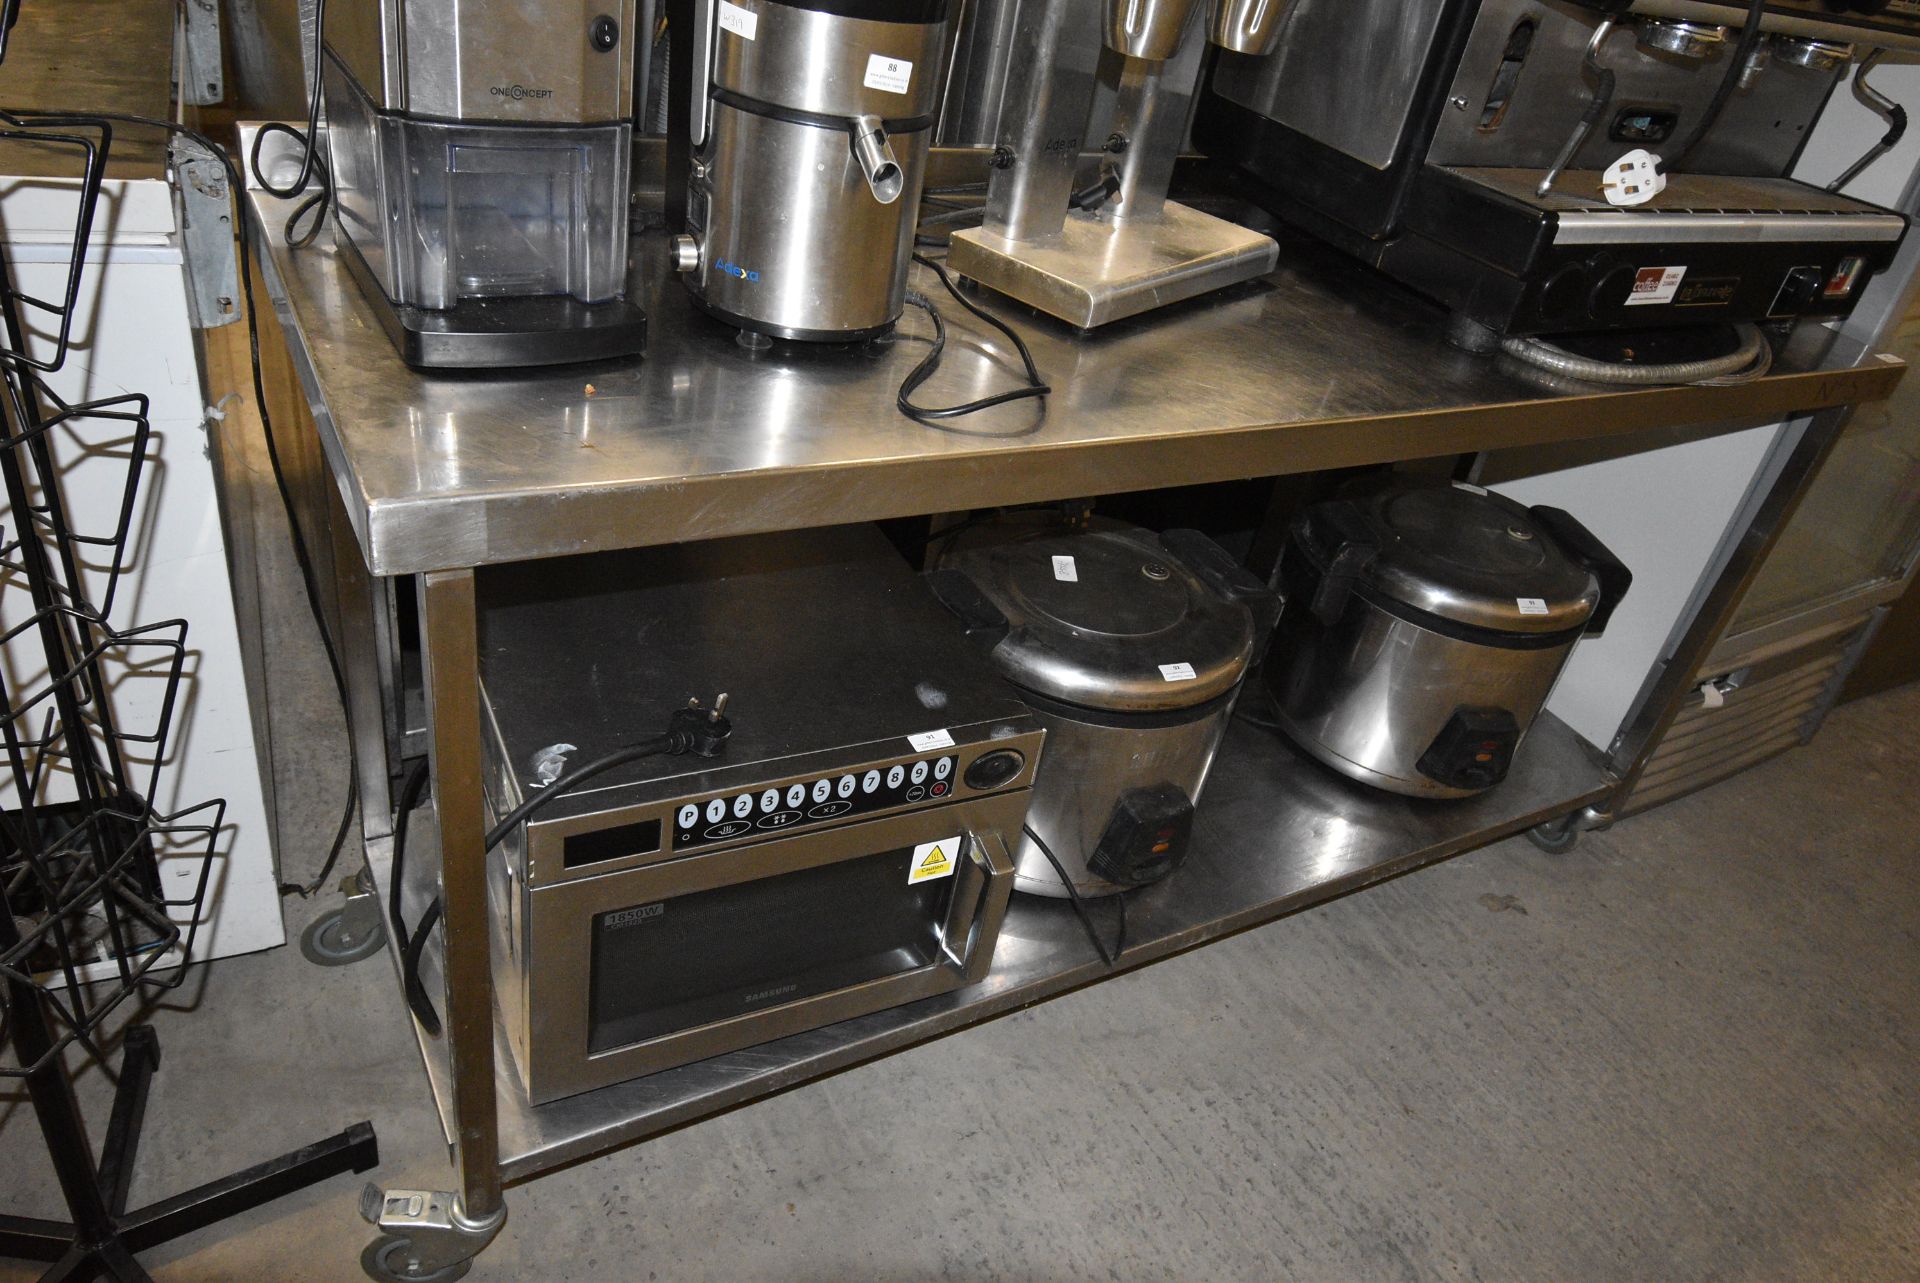 Stainless Steel Preparation Table with Undershelf